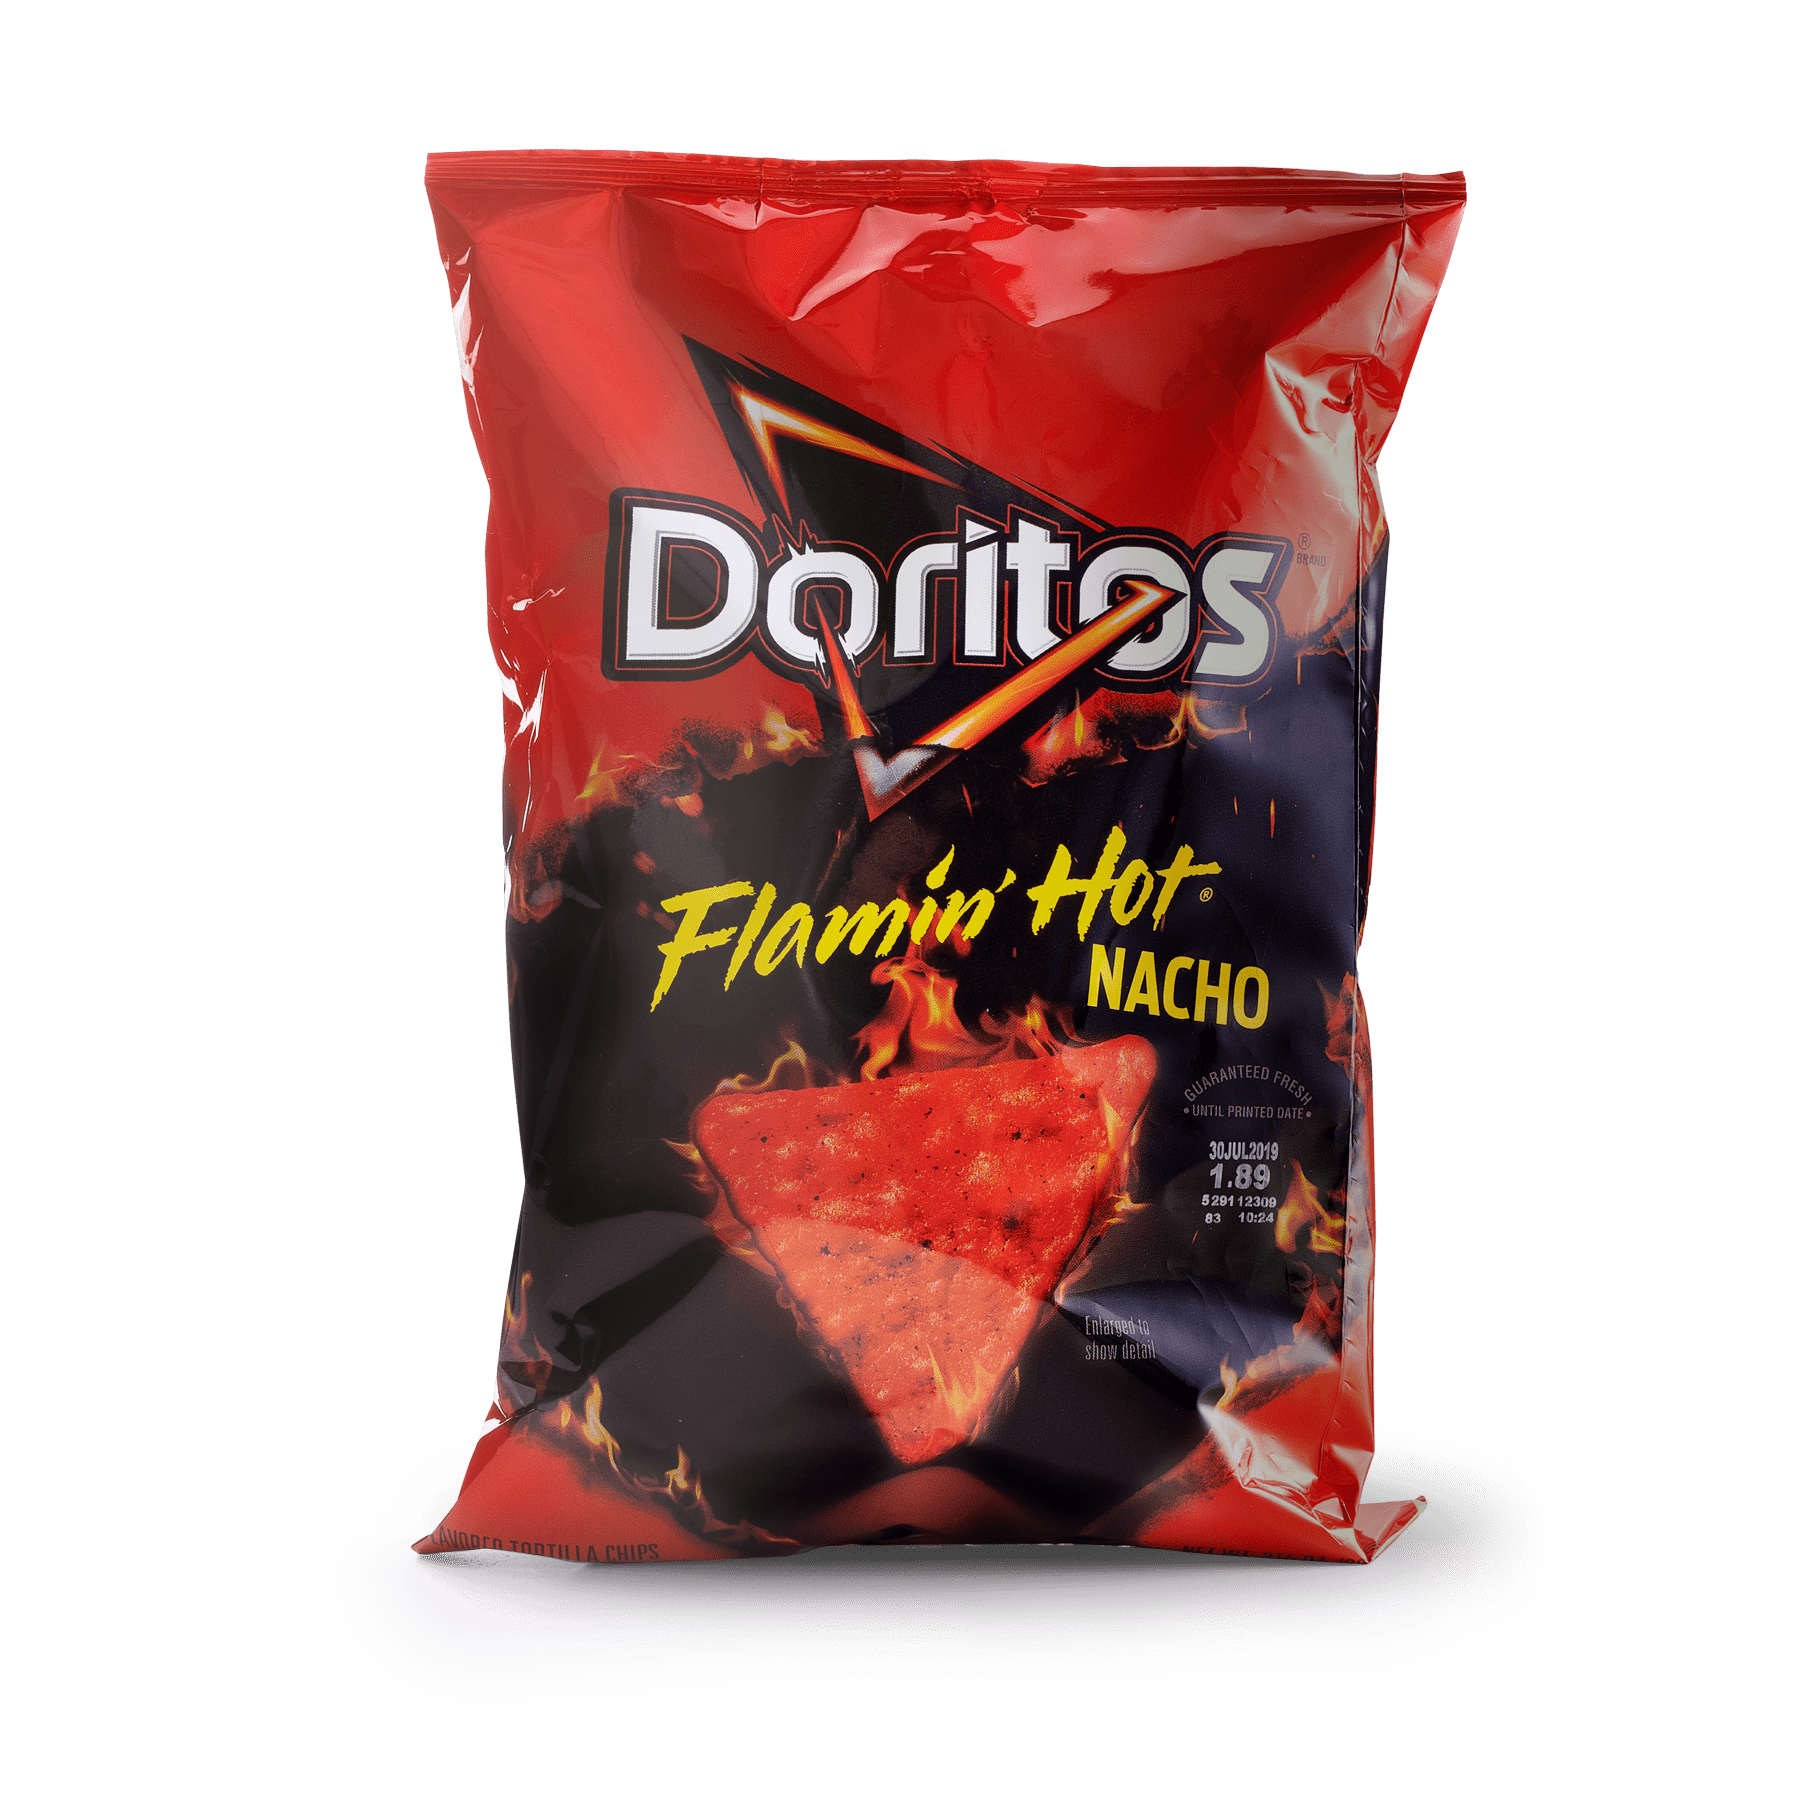 You Can Get a Giant Bag of Doritos Ultimate Cheddar Chips at Sams Club